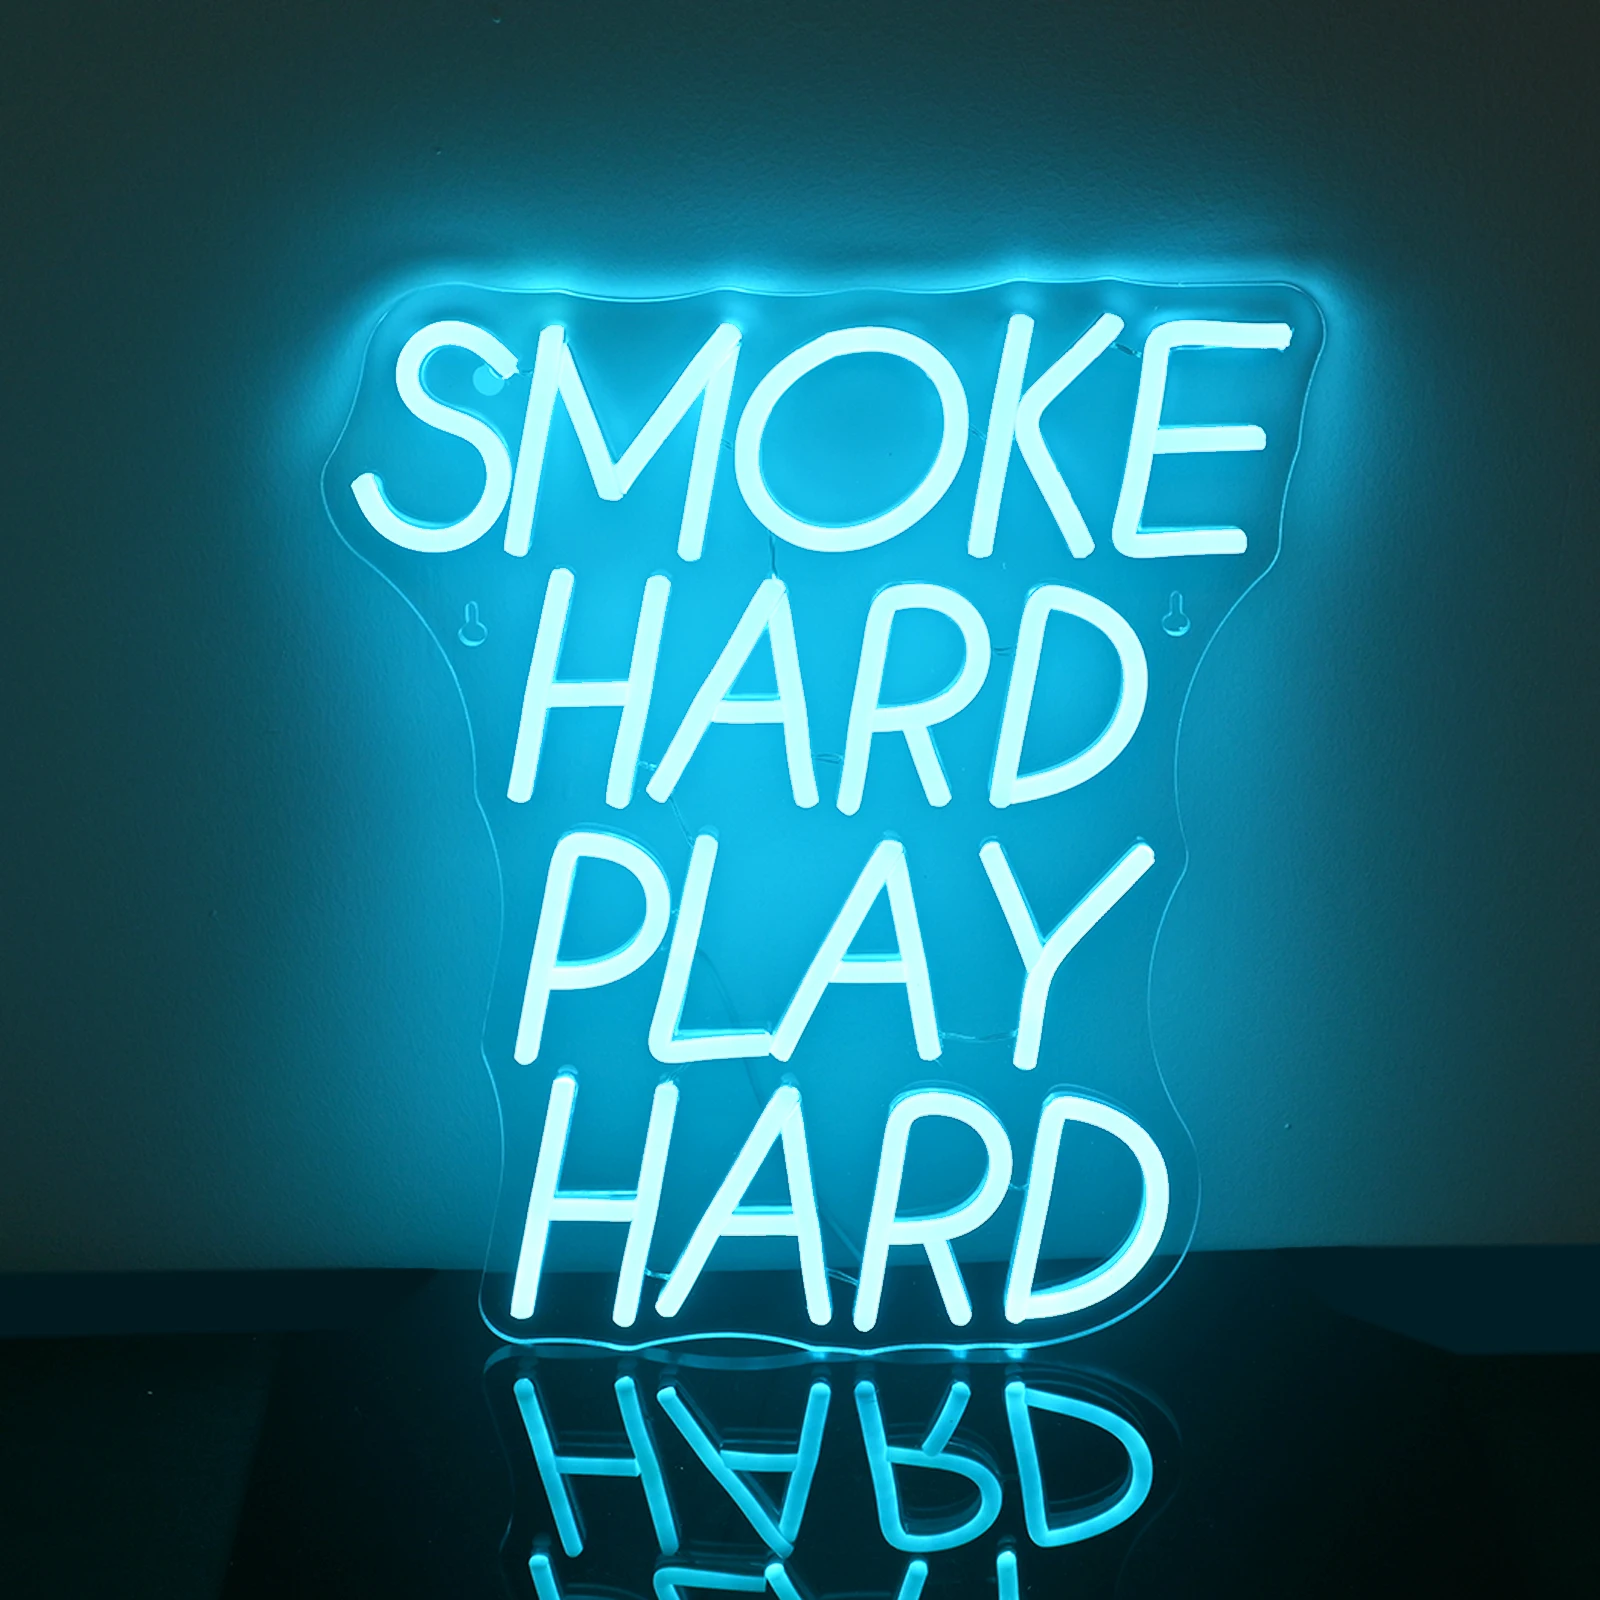 

Smoke Hard Play Hard Ice Blue Letters Neon Signs Led lights Bedroom Decor Dimmable For Gaming Lighting Bar Nightclub Man Cave